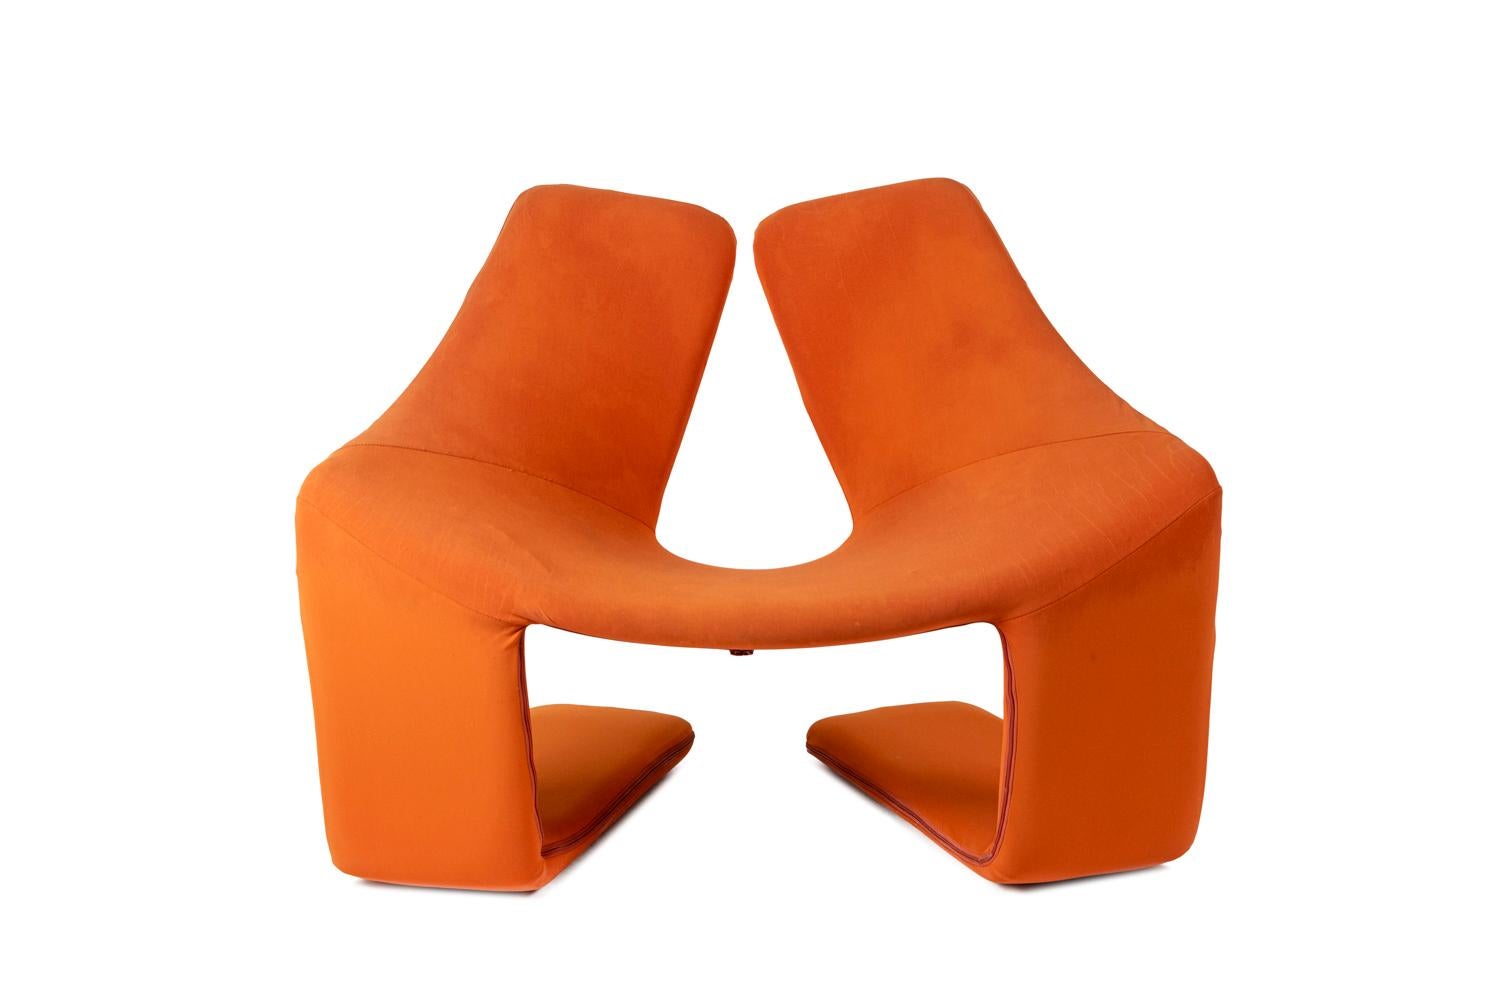 Kwok Hoï Chan for Steiner, attributed to.

“Zen” armchair with a metallic structure padded with foam and covered by a stretch orange fabric standing on two large feet in two parts. Back in two parts.

Work realized in 1969, more recent